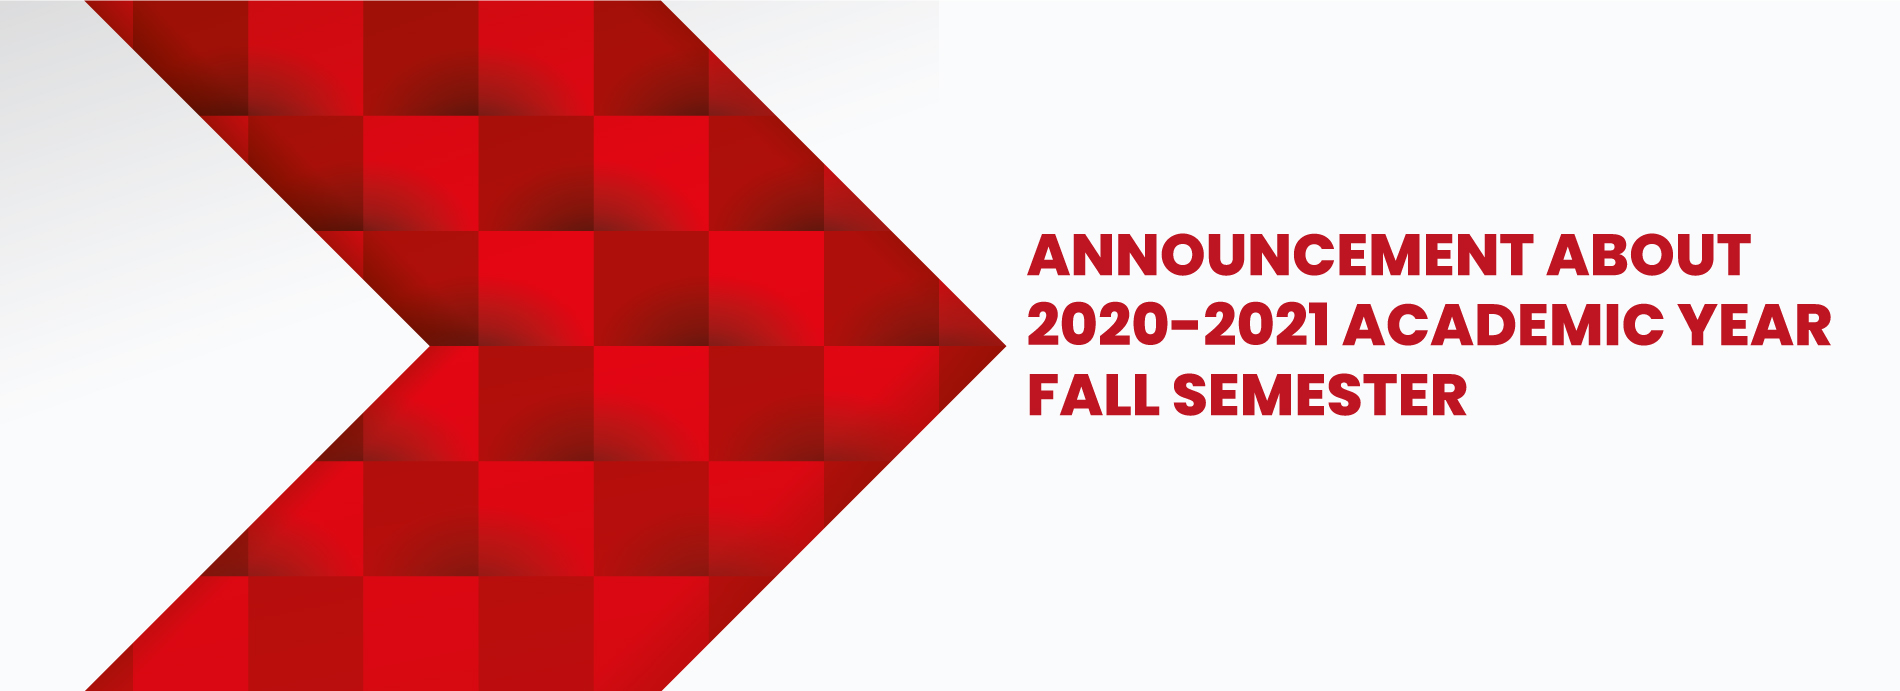 ANNOUNCEMENT ABOUT 20202021 ACADEMIC YEAR FALL SEMESTER